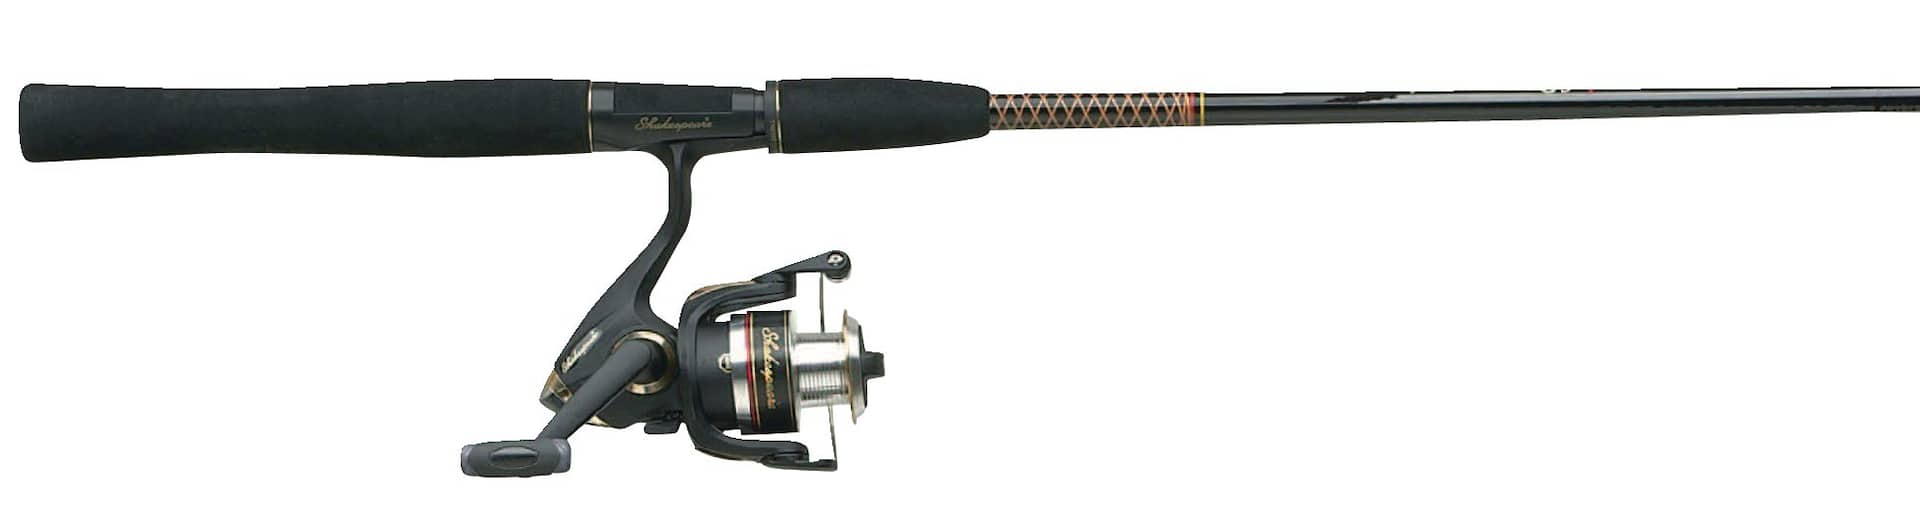 Surfcasting rod and reel combo will separate - sporting goods - by owner -  sale - craigslist